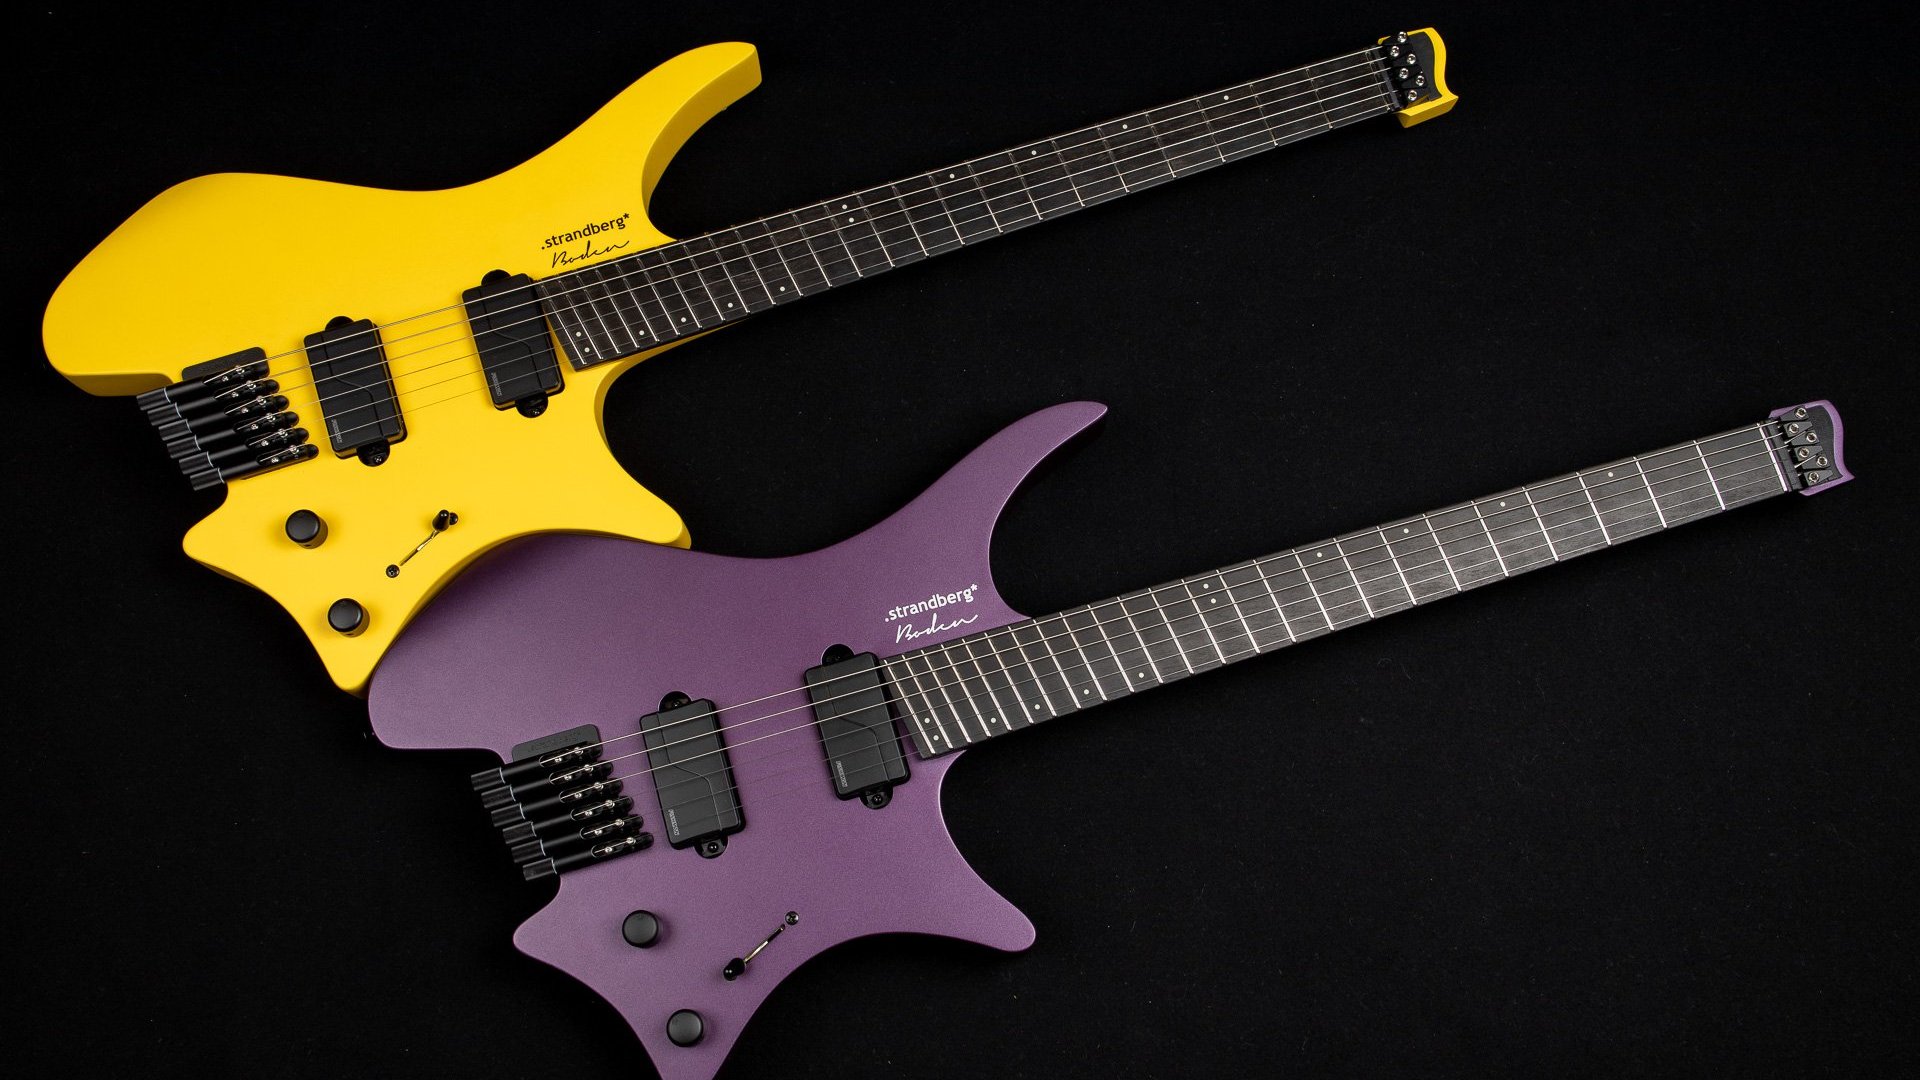 Headless Guitar Boden Metal purple and yellow front view side by side